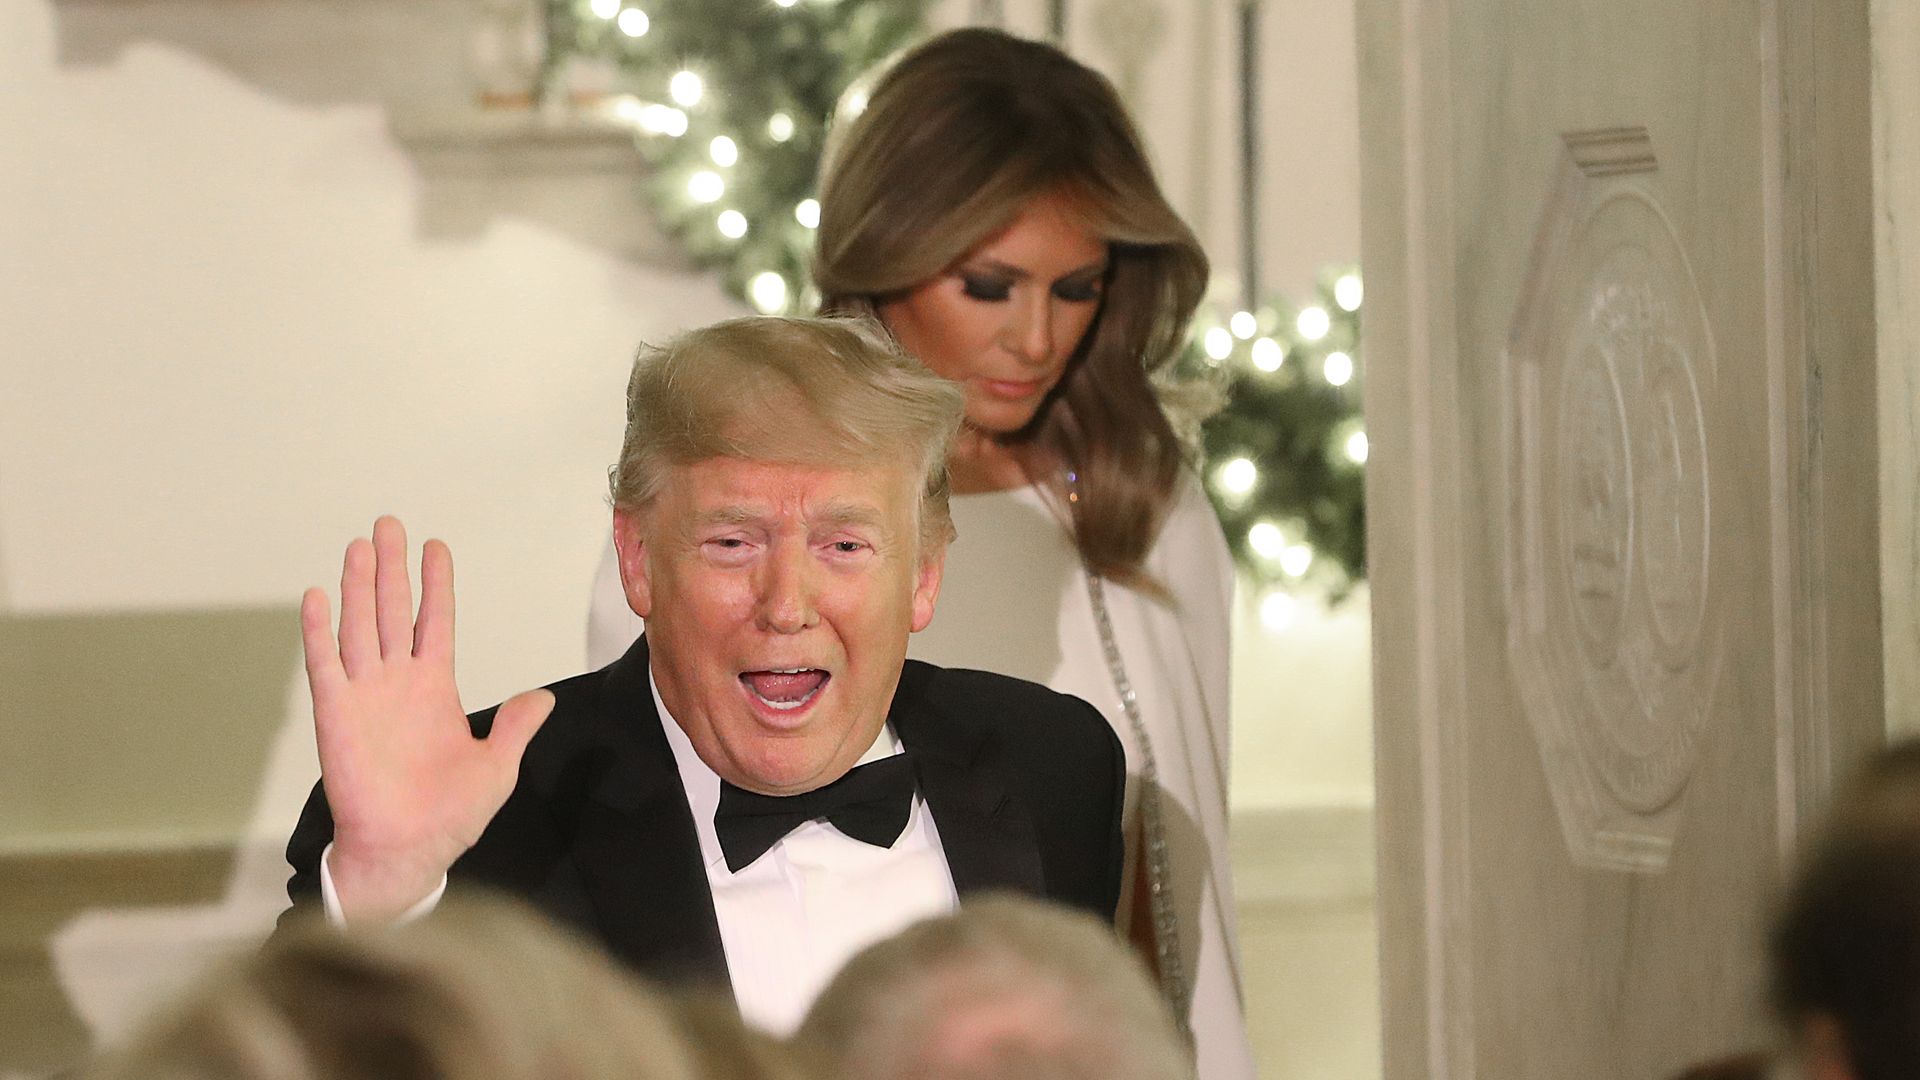 President Donald Trump waves to guests at the Congressional Ball at the White House as First Lady Melania Trump stands behind him.